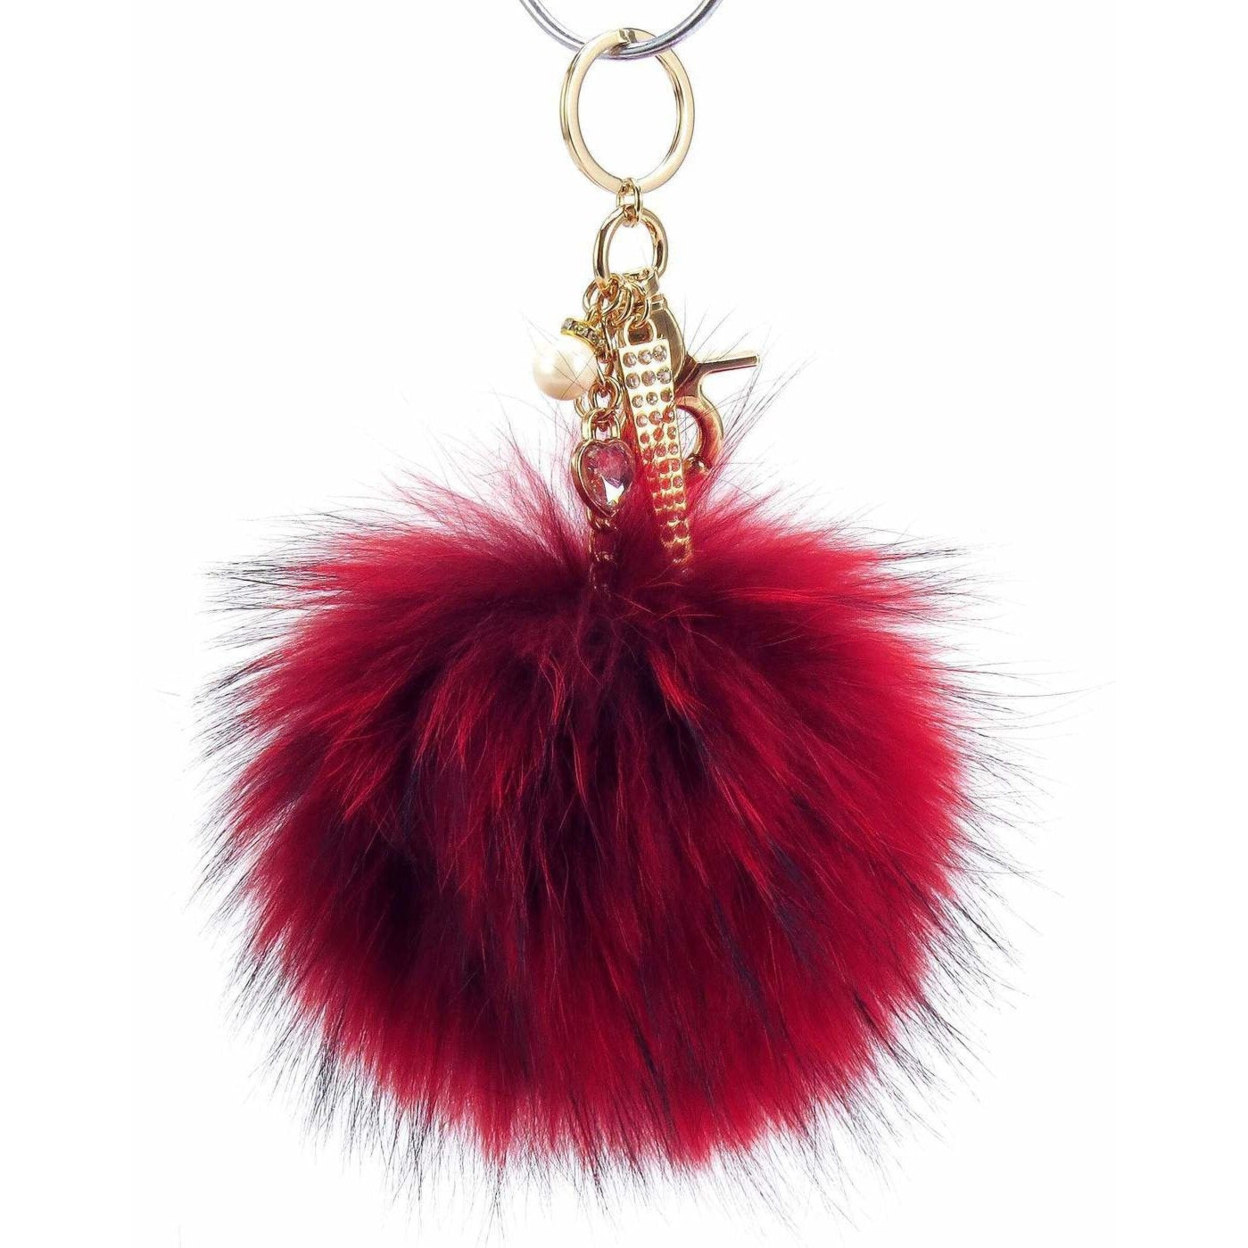 Real Fur Puff Ball Pom-Pom 6 Accessory Dangle Purse Charm - Red With Gold Hardware